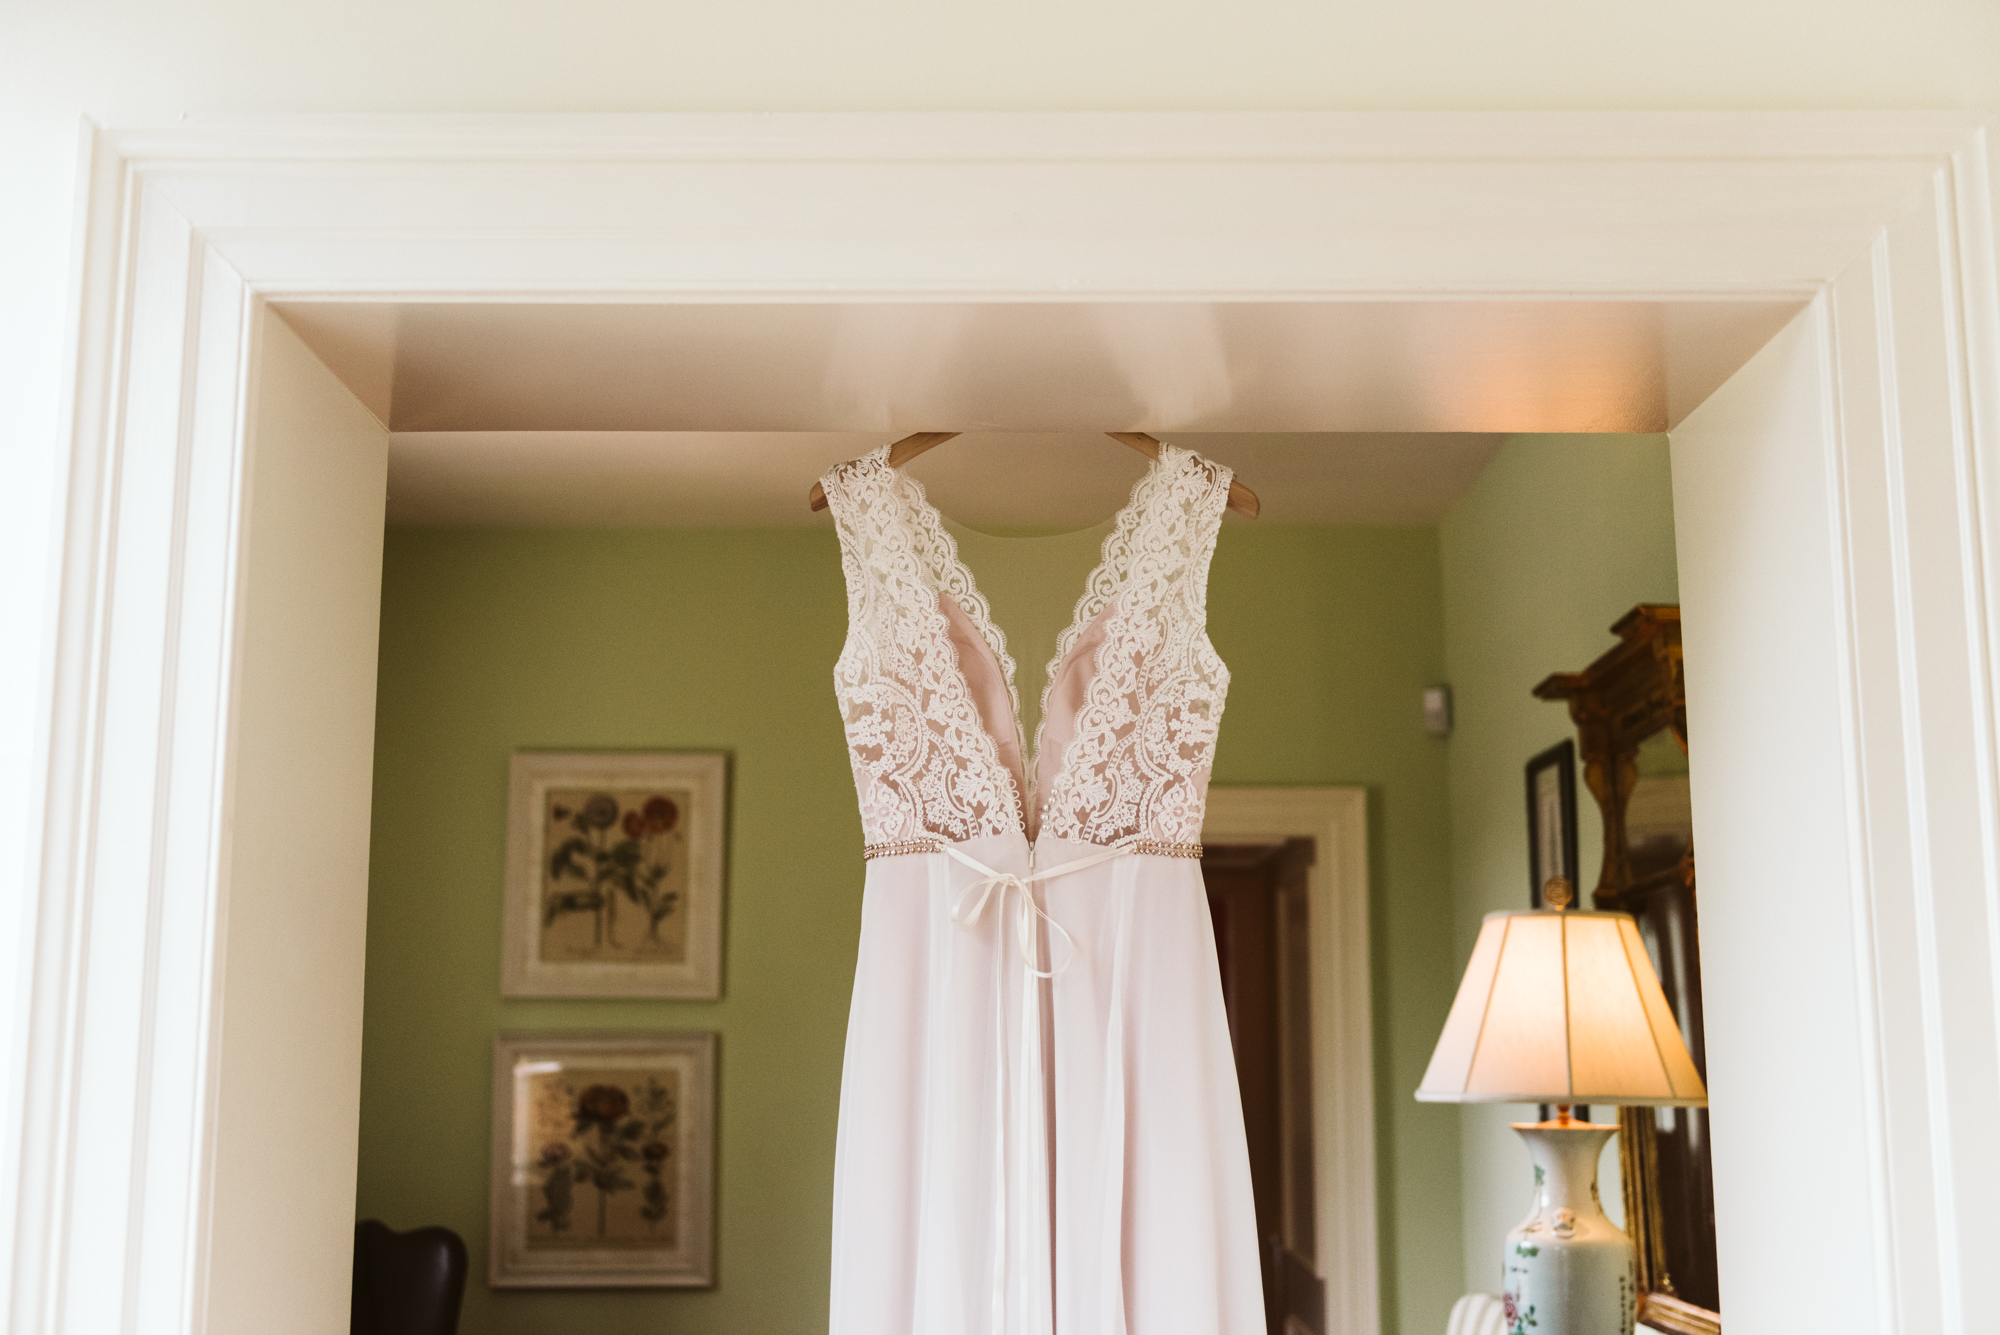 Elegant, Columbia Country Club, Chevy Chase Maryland, Baltimore Wedding Photographer, Classic, Traditional, BHLDN Wedding Dress, The Dress Hanging in Doorway